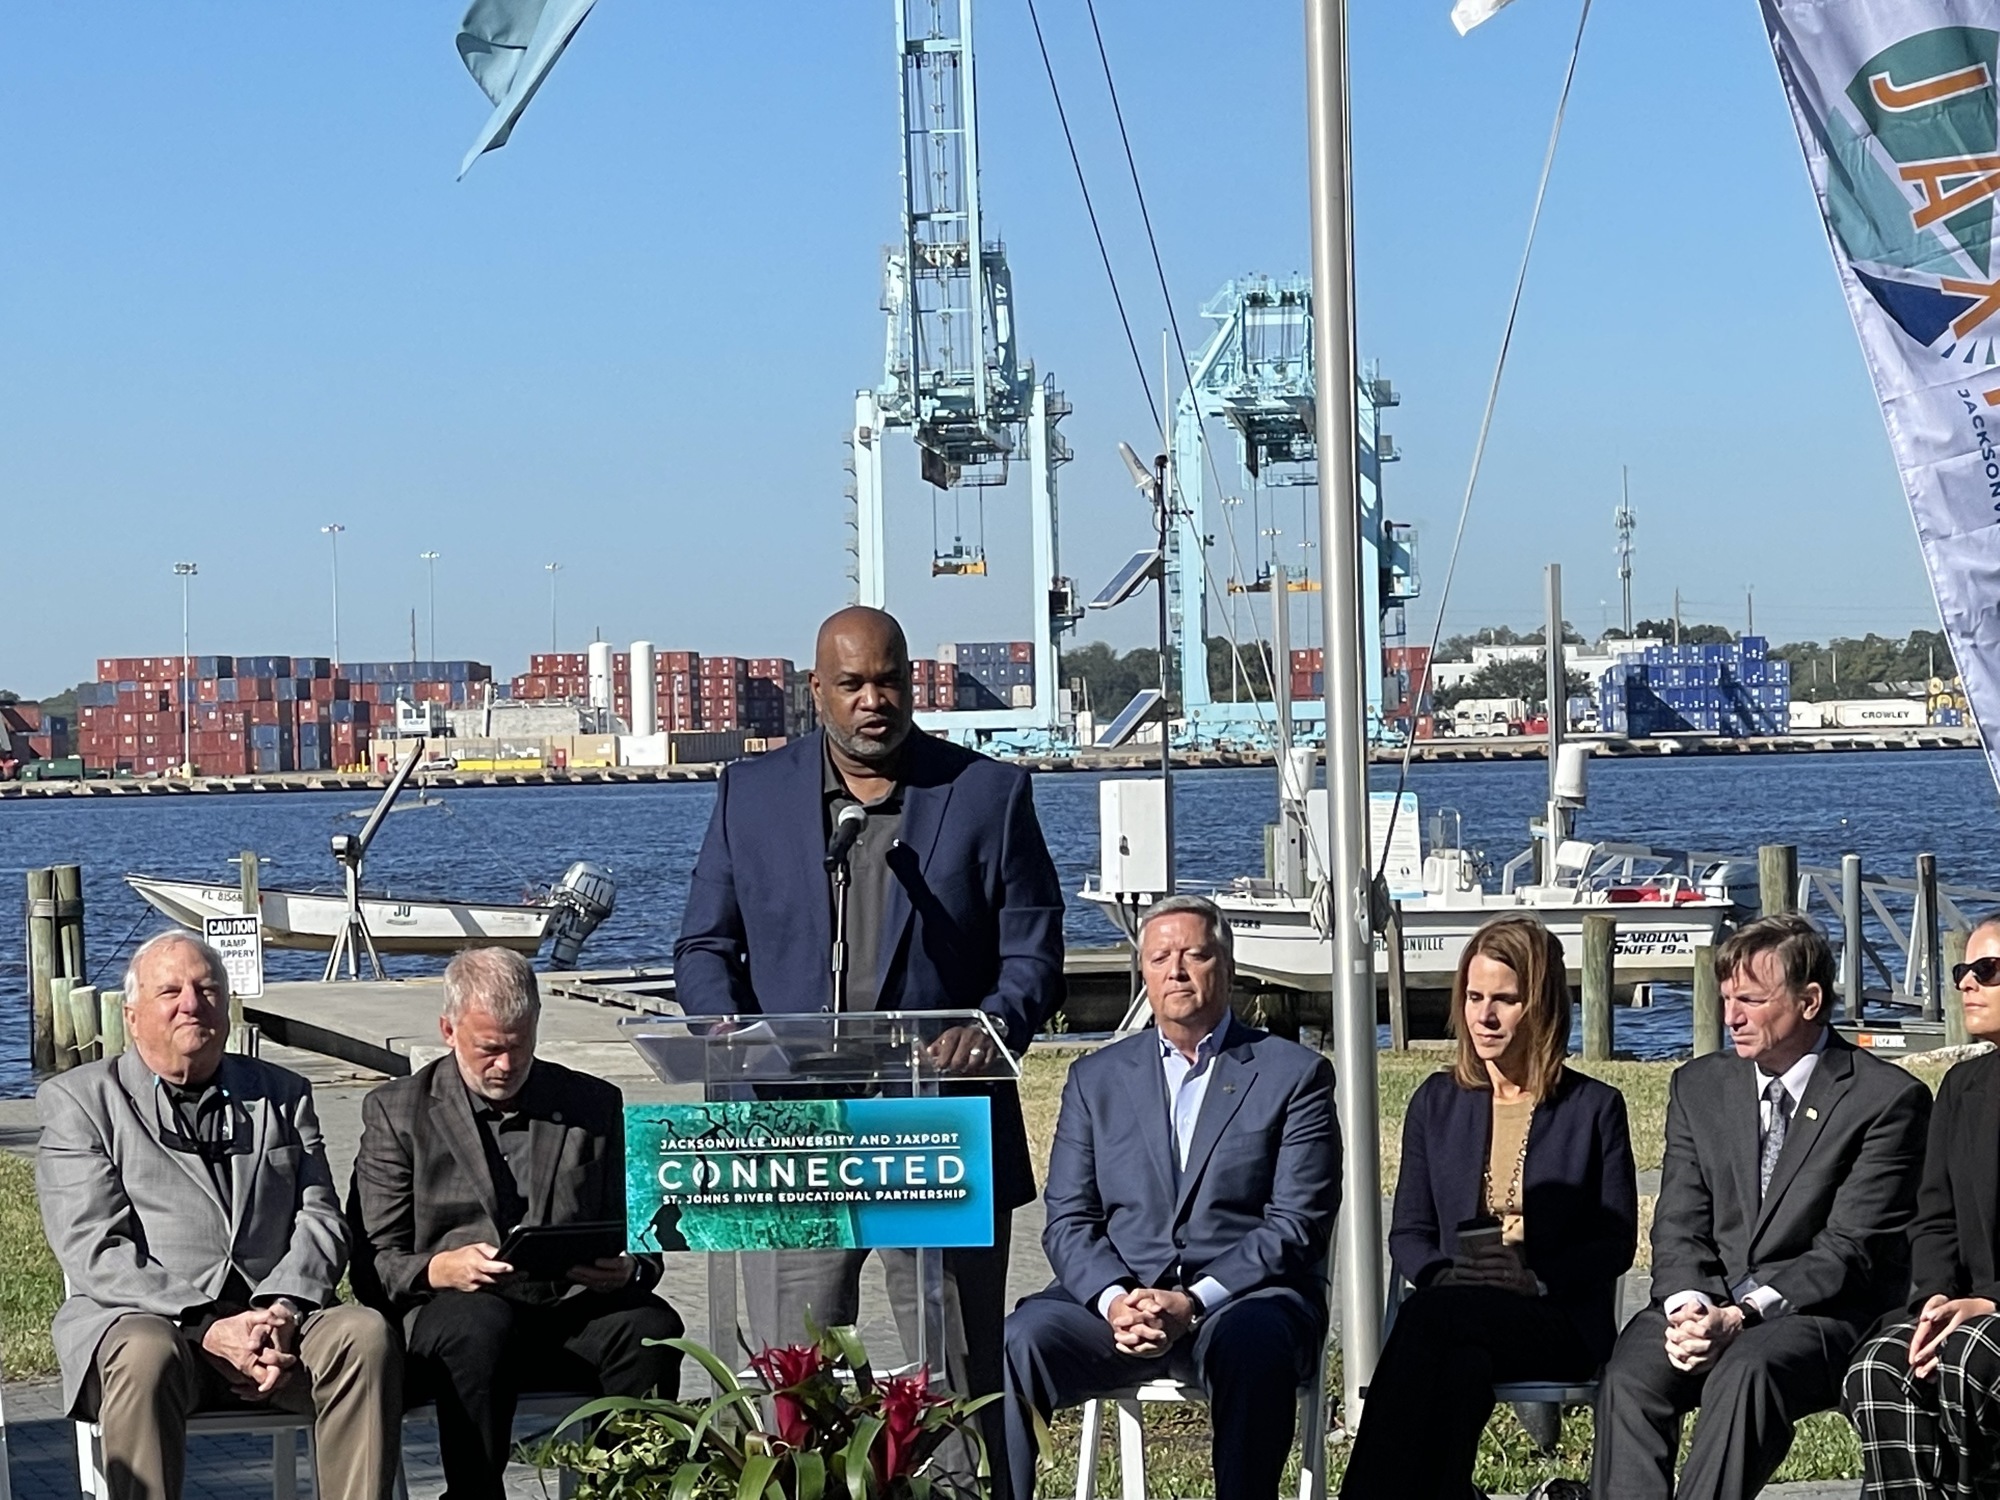 JaxPort CEO Eric Green speaks Nov. 15 on the Jacksonville University campus during the announcement of the “Connected” imitative.